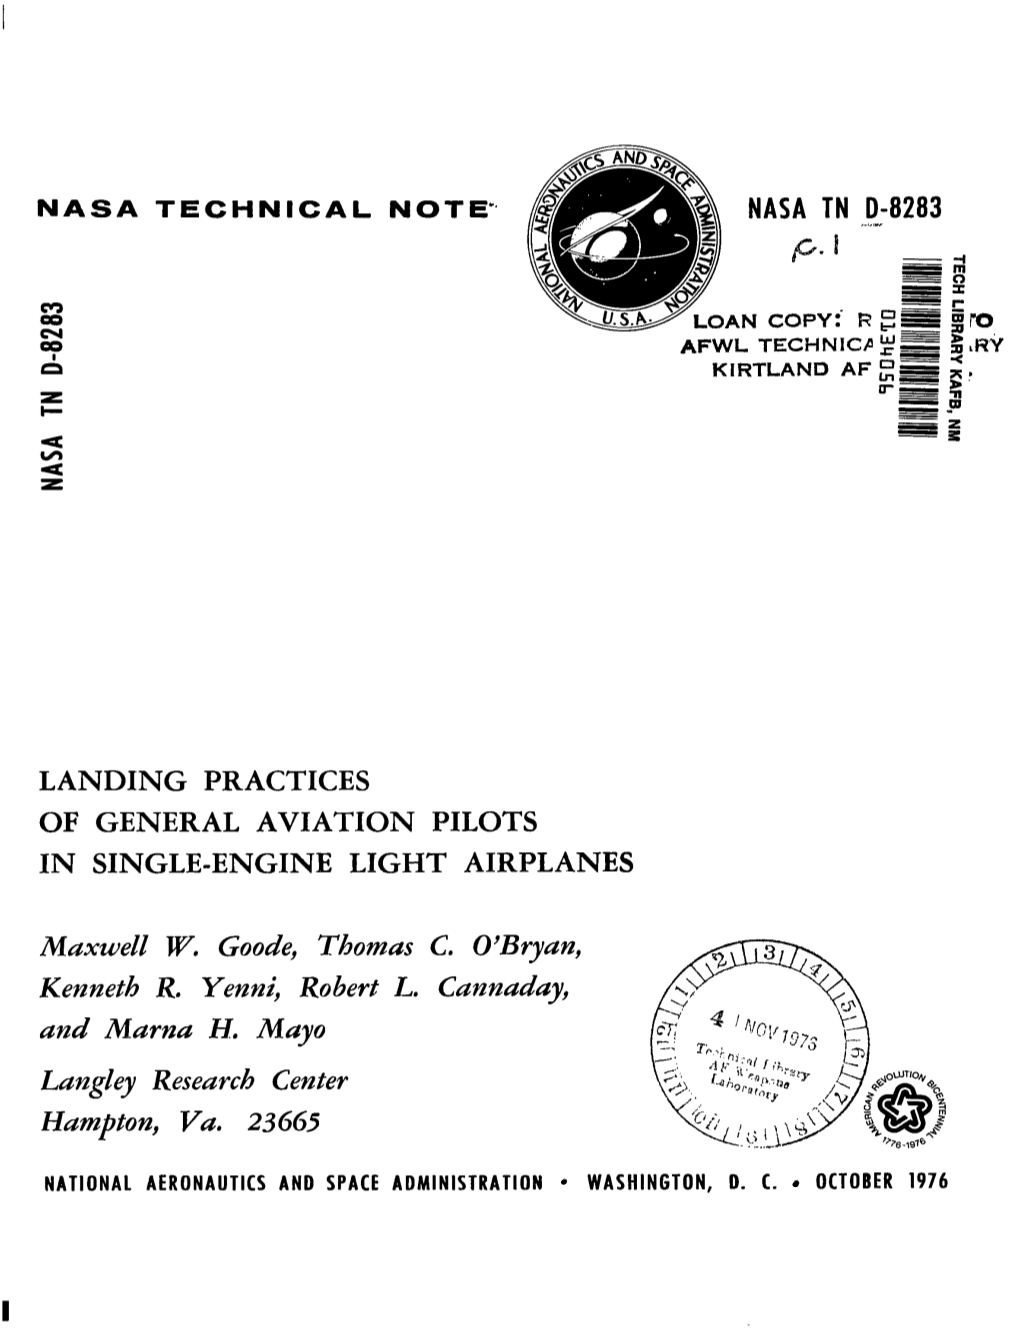 Landing Practices of General Aviation Pilots in Single-Engine Light Airplanes